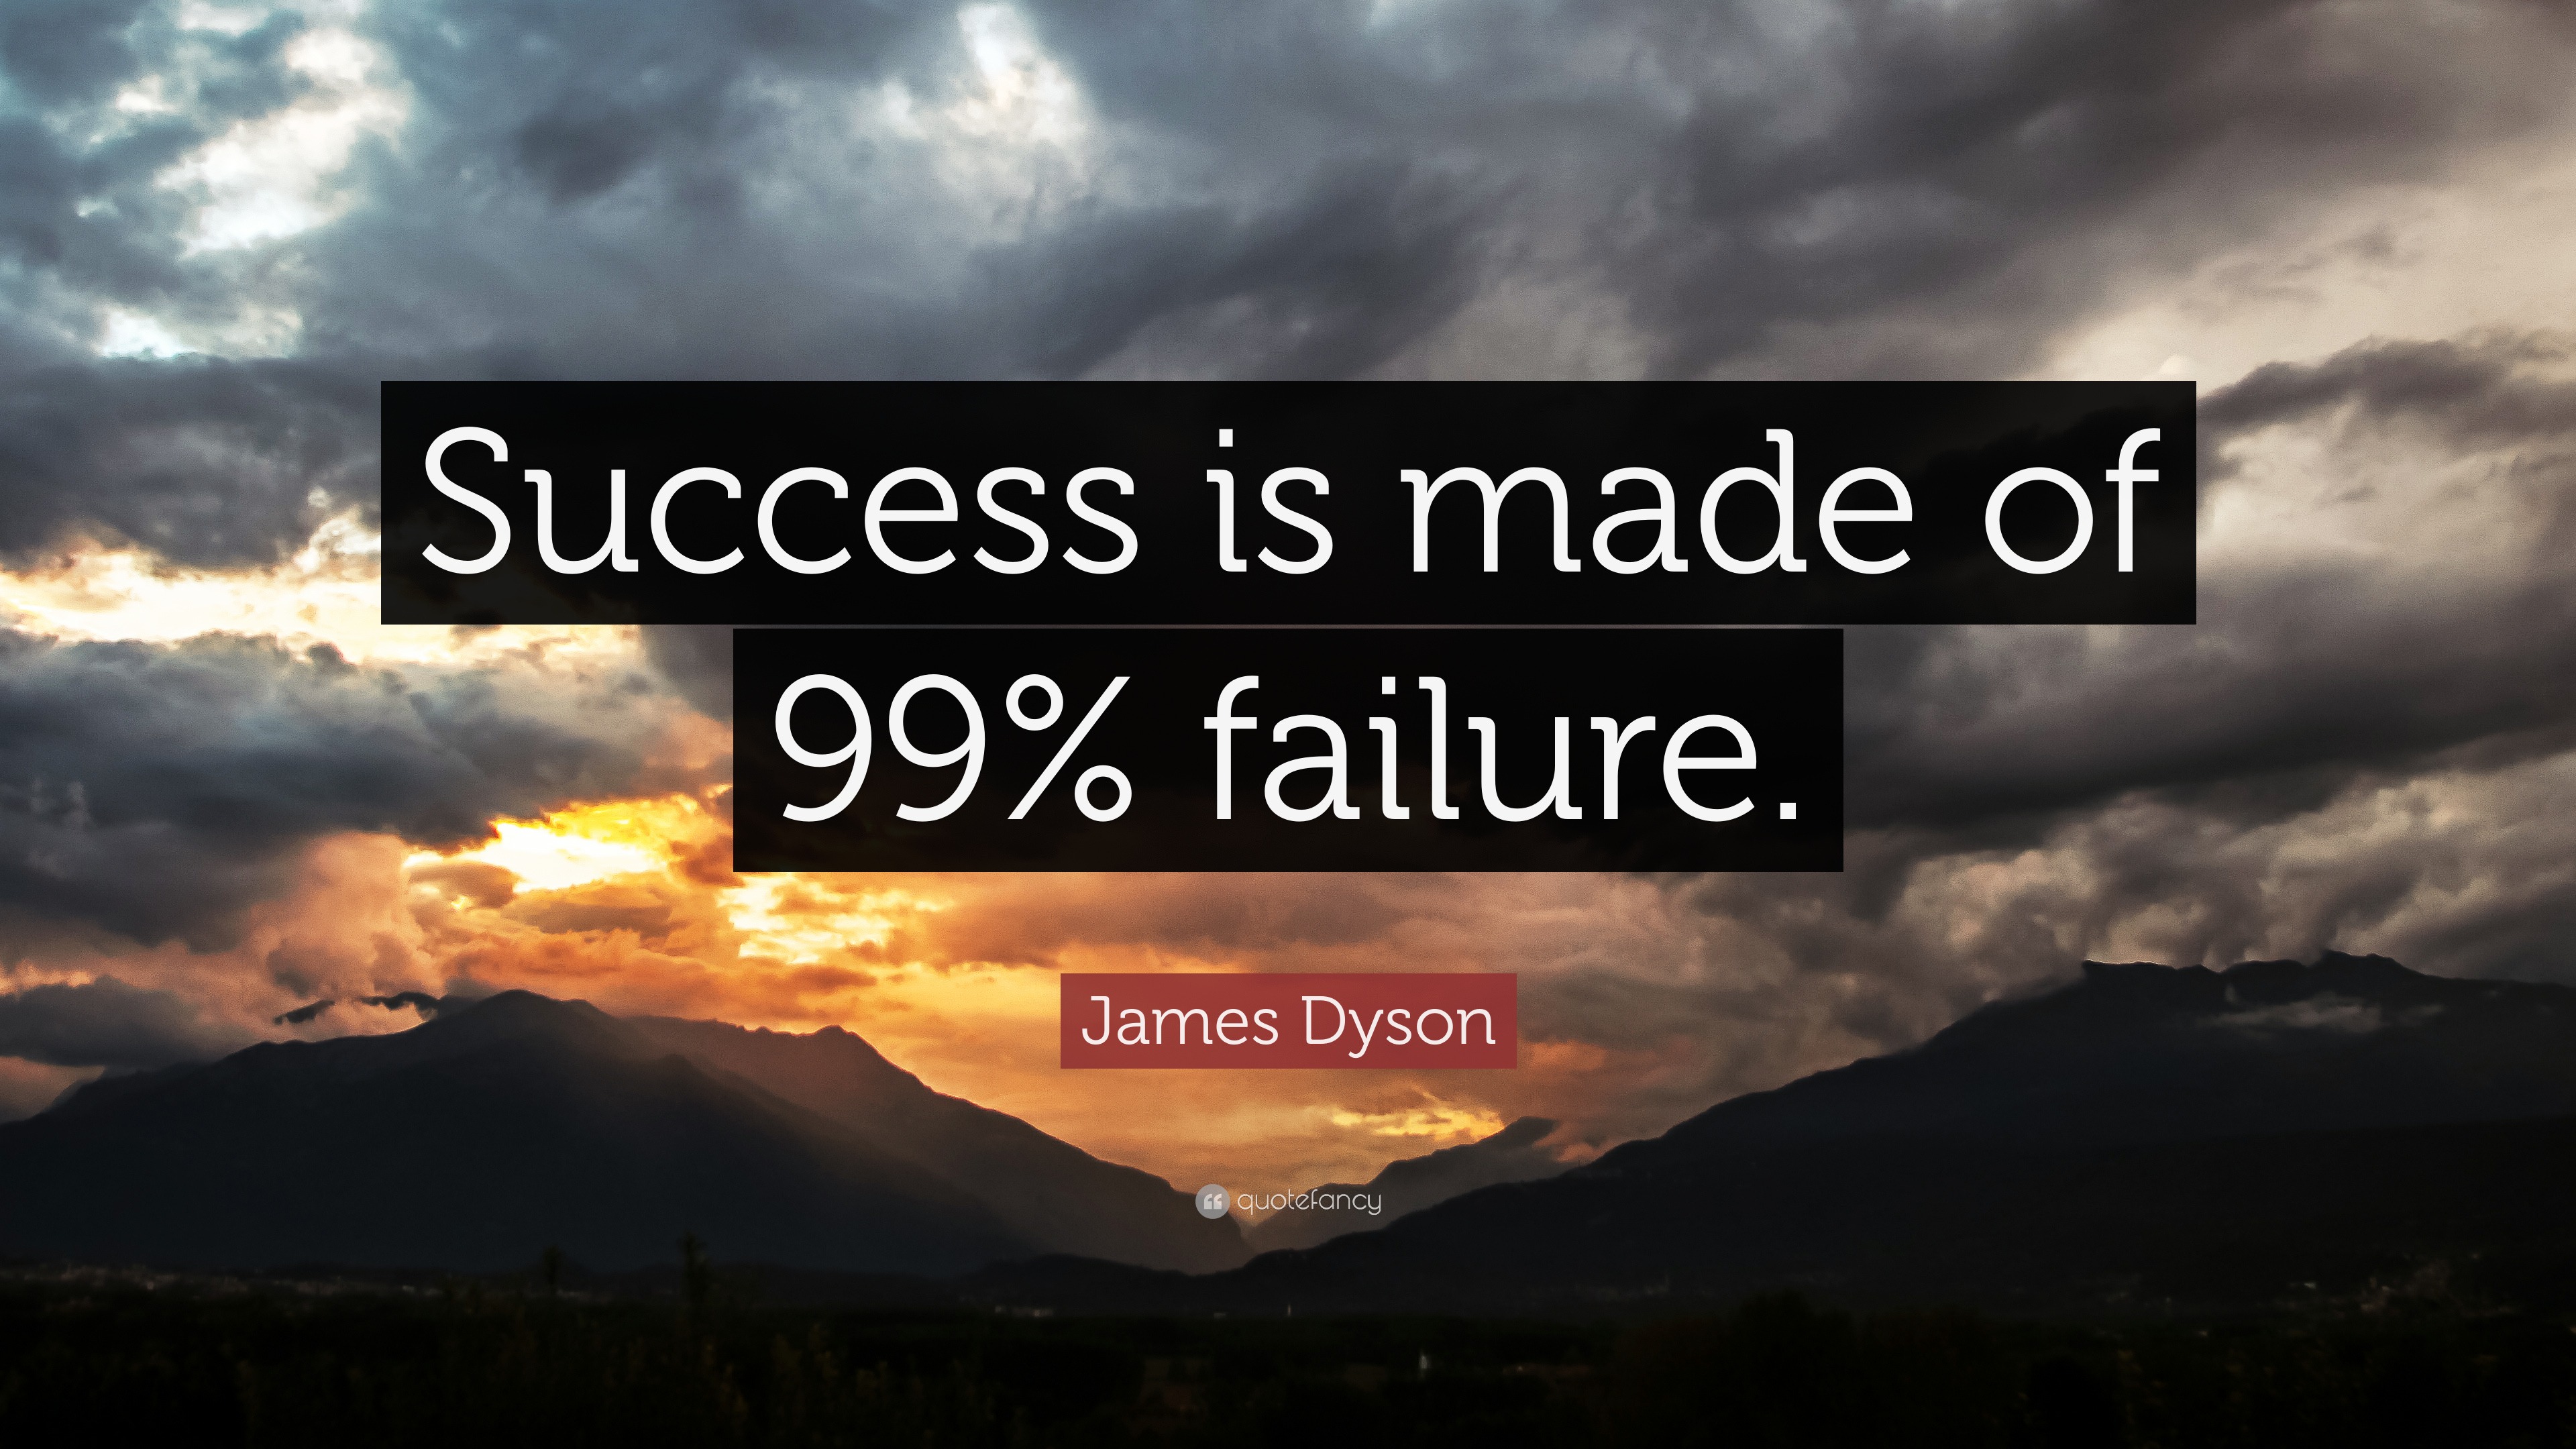 James Dyson Quote: “Success is made of 99% failure.”